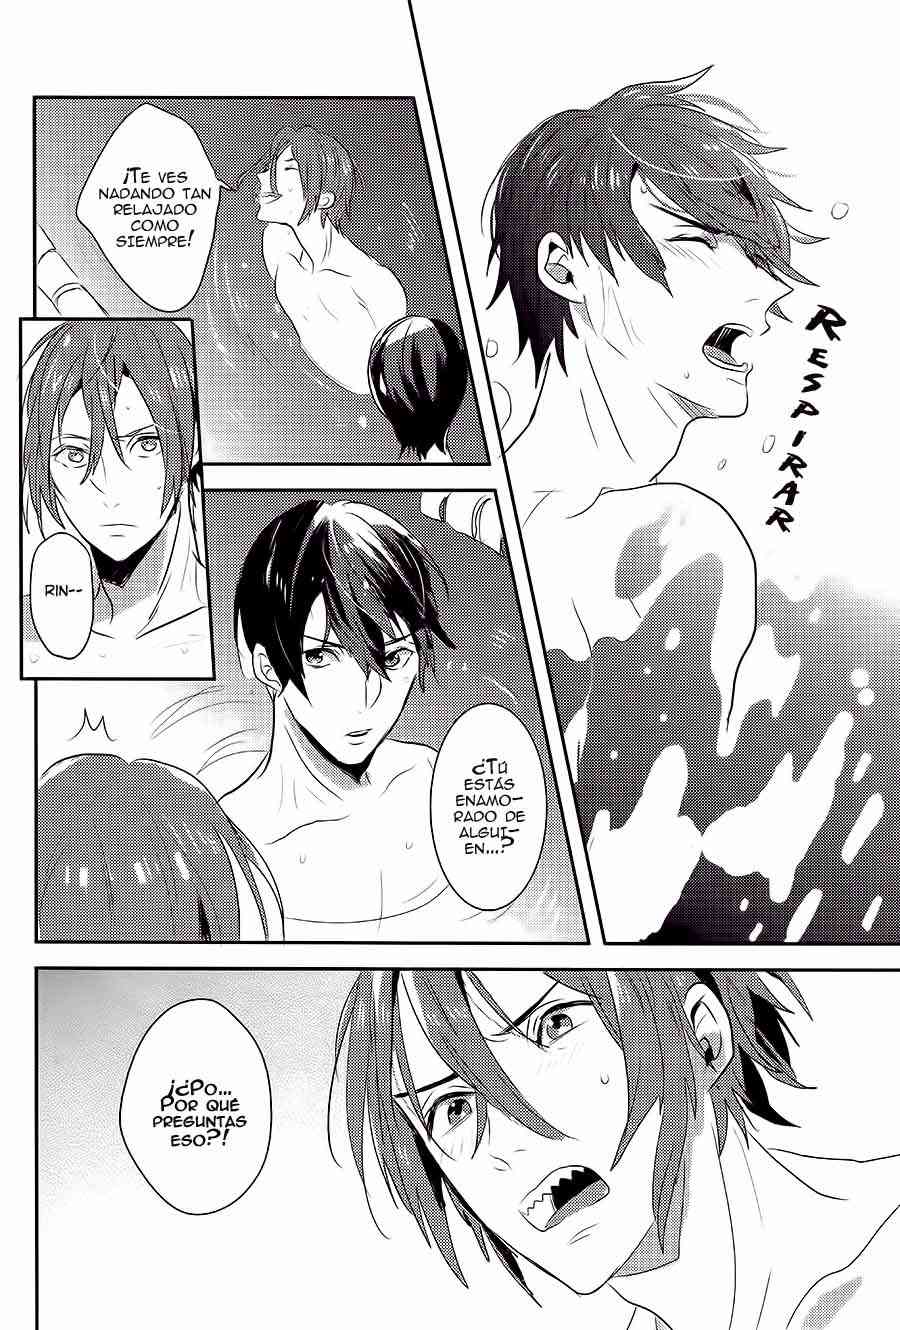 Doujinshi Free! Shark & Dolphins rendezvous Chapter-1 - 23